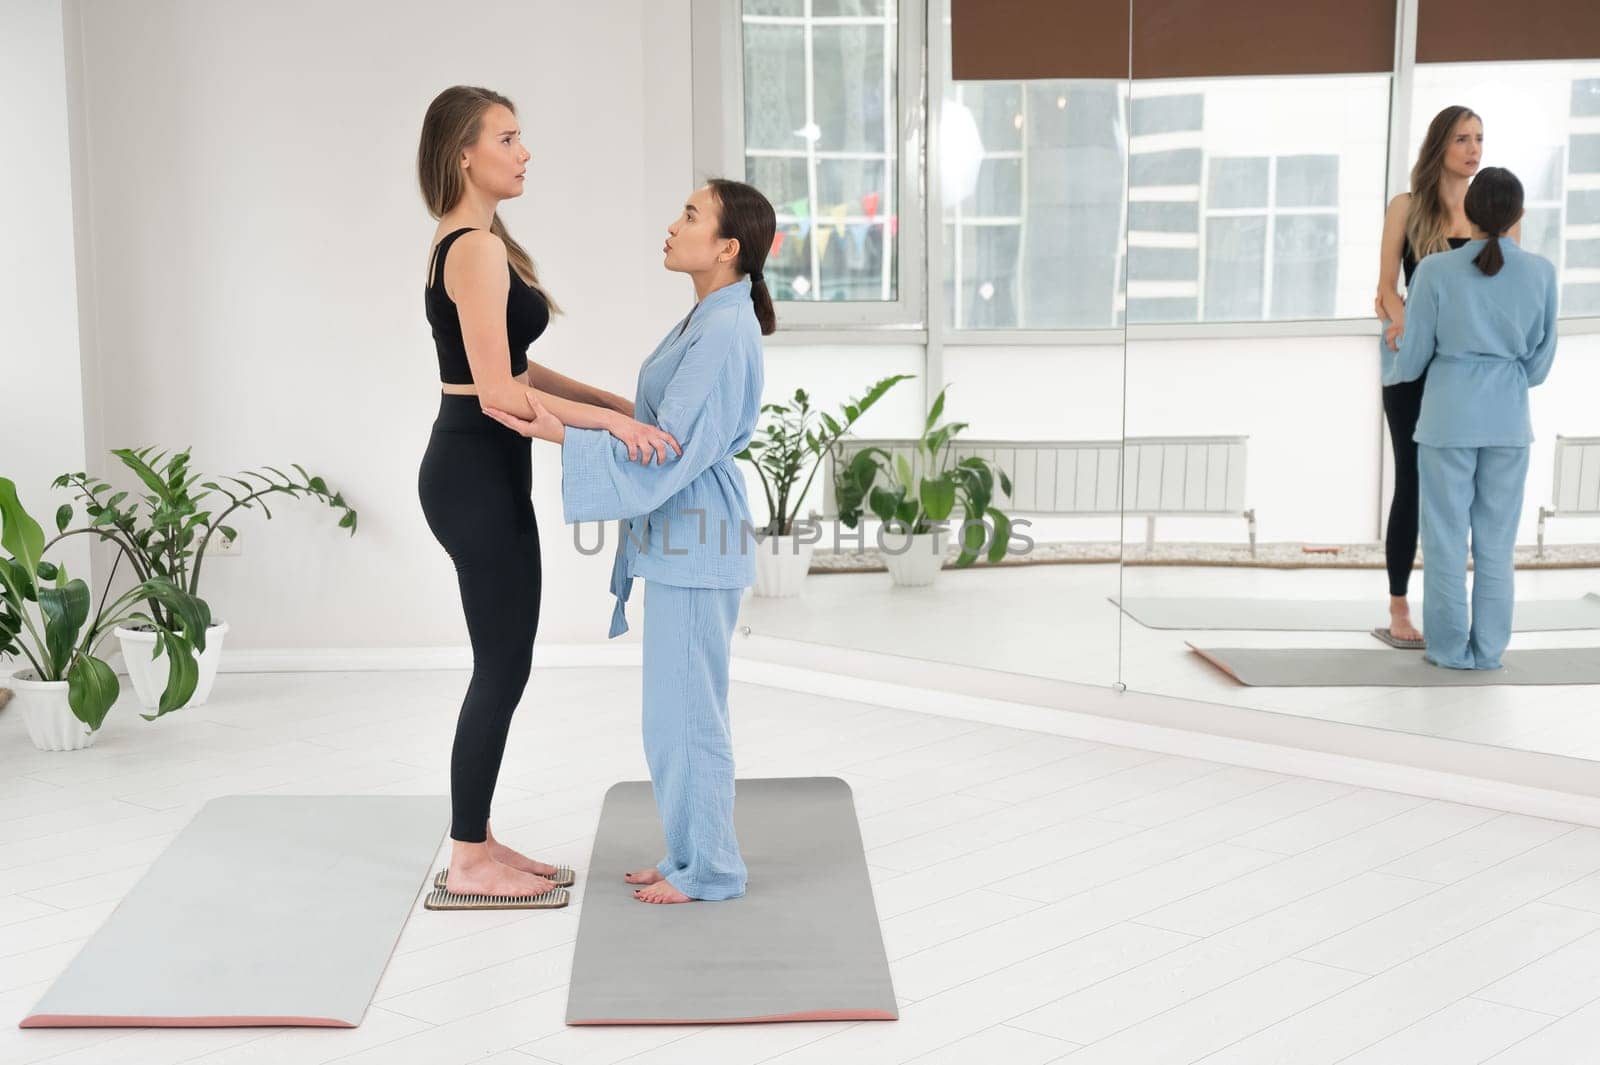 Caucasian woman stands on sadhu boards with therapist support